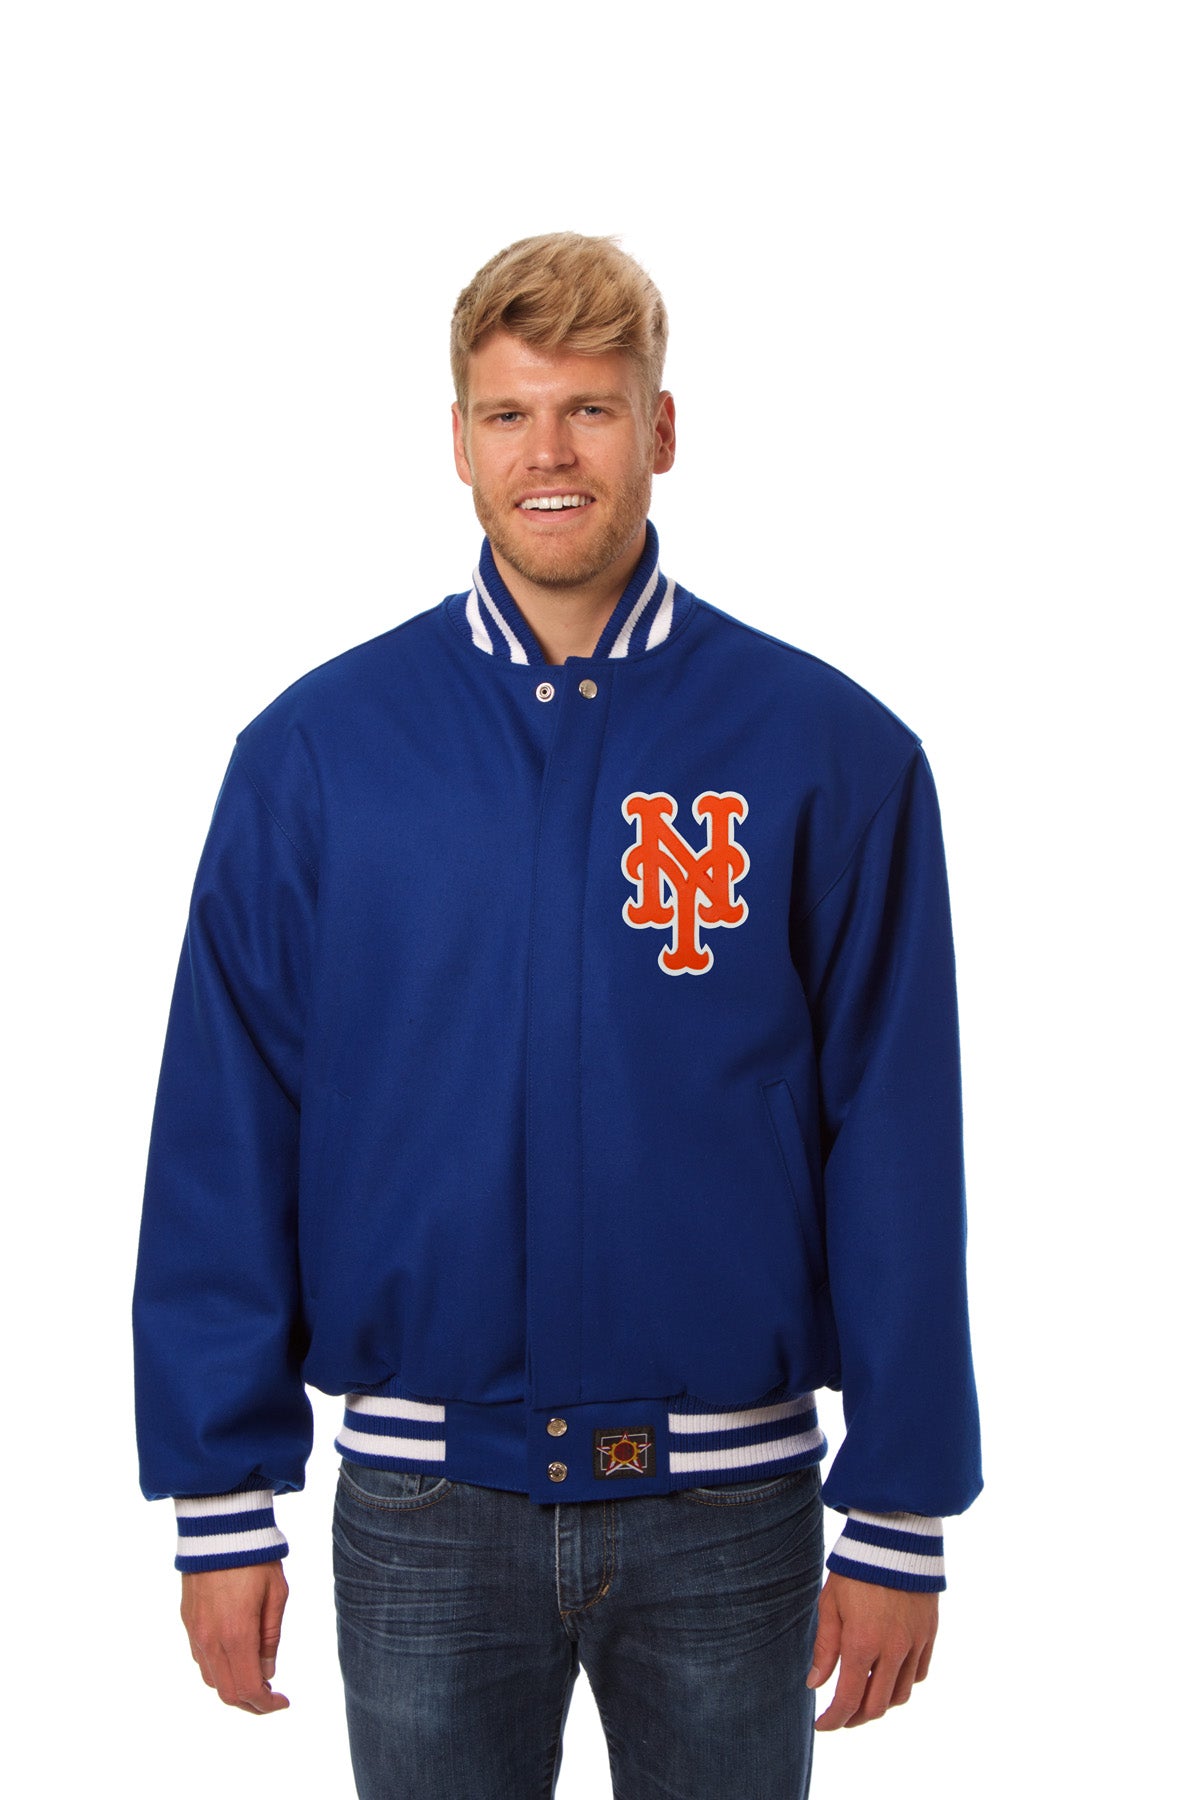 New York Mets Wool Jacket w/ Handcrafted Leather Logos - Royal 2X-Large